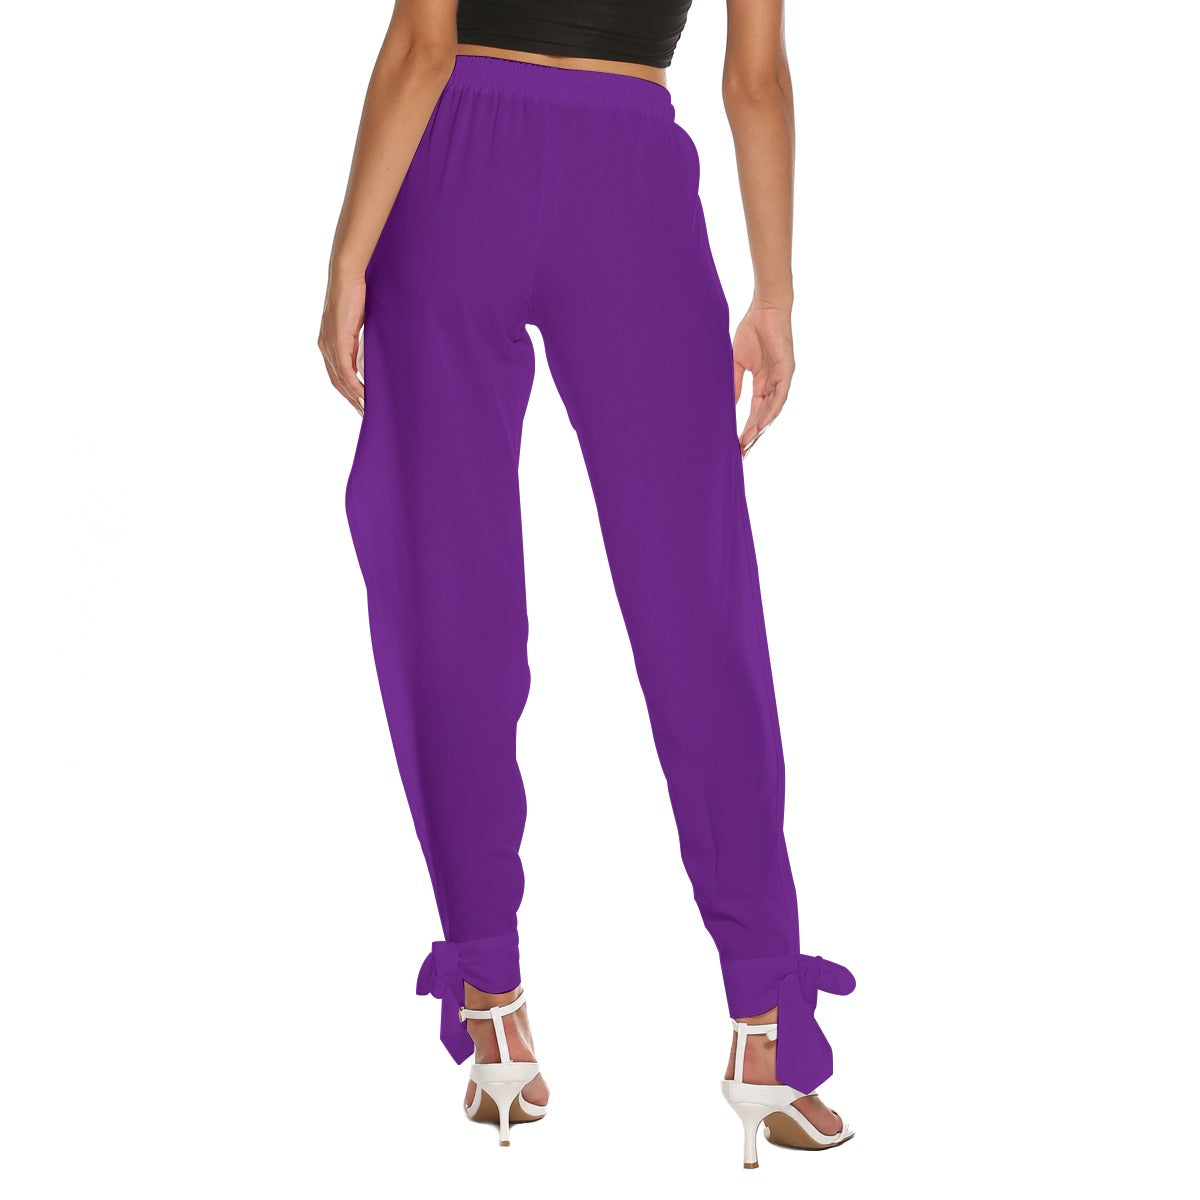 Women's Purple (with paintings) Side Cutout Pants Beach and Resort Wear